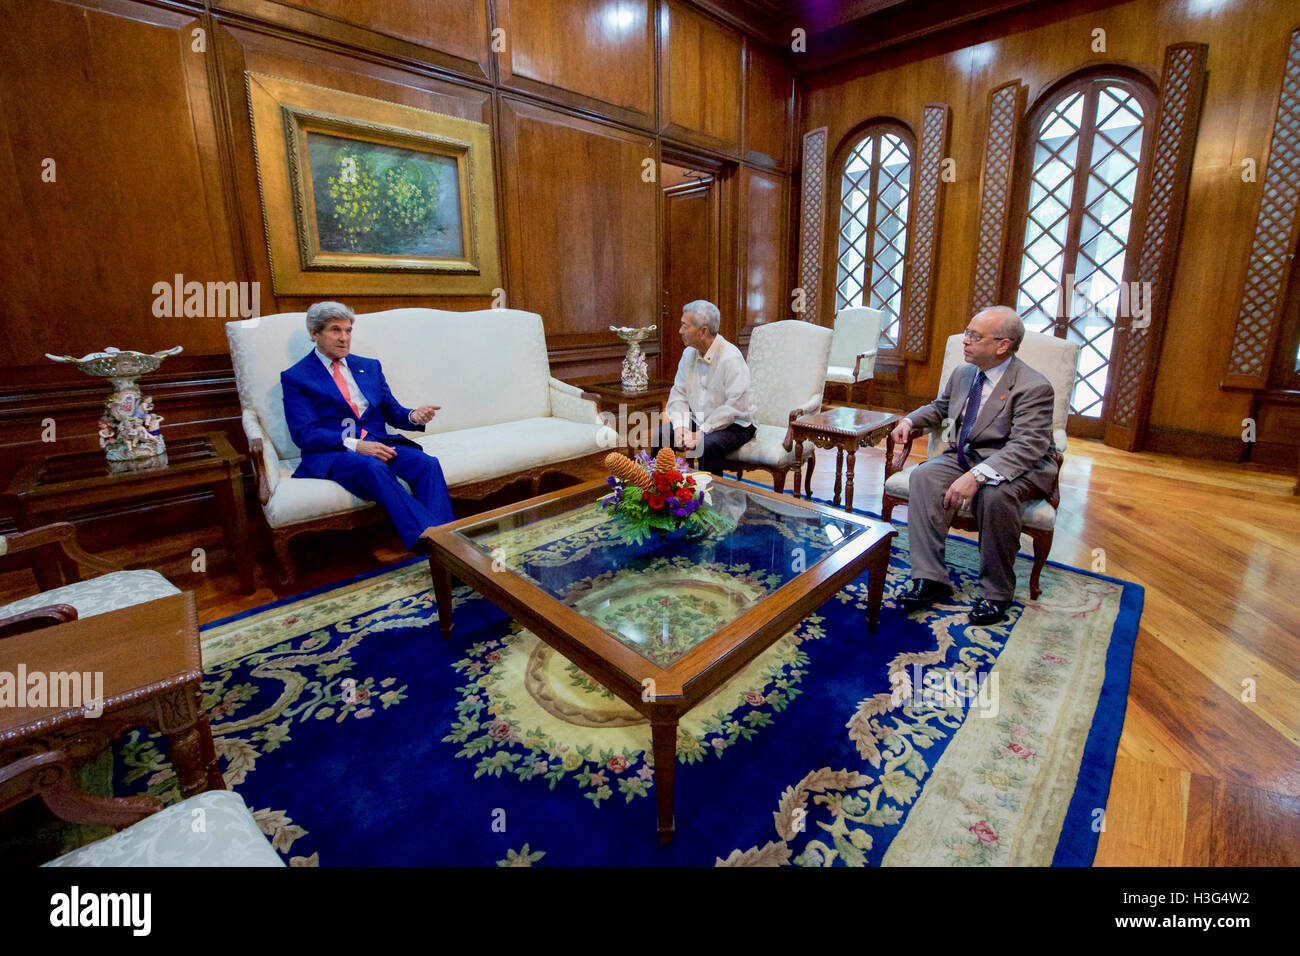 U.S. Secretary of State John Kerry sits with Philippines Foreign Secretary Perfecto Yasay and Assistant Secretary of State for East Asian and Pacific Affairs Daniel Russel in the Malacañang Palace in Manila, Philippines, on July 27, 2016, before the Secretary held a working lunch with Philippines President Rodrigo Duterte. Stock Photo